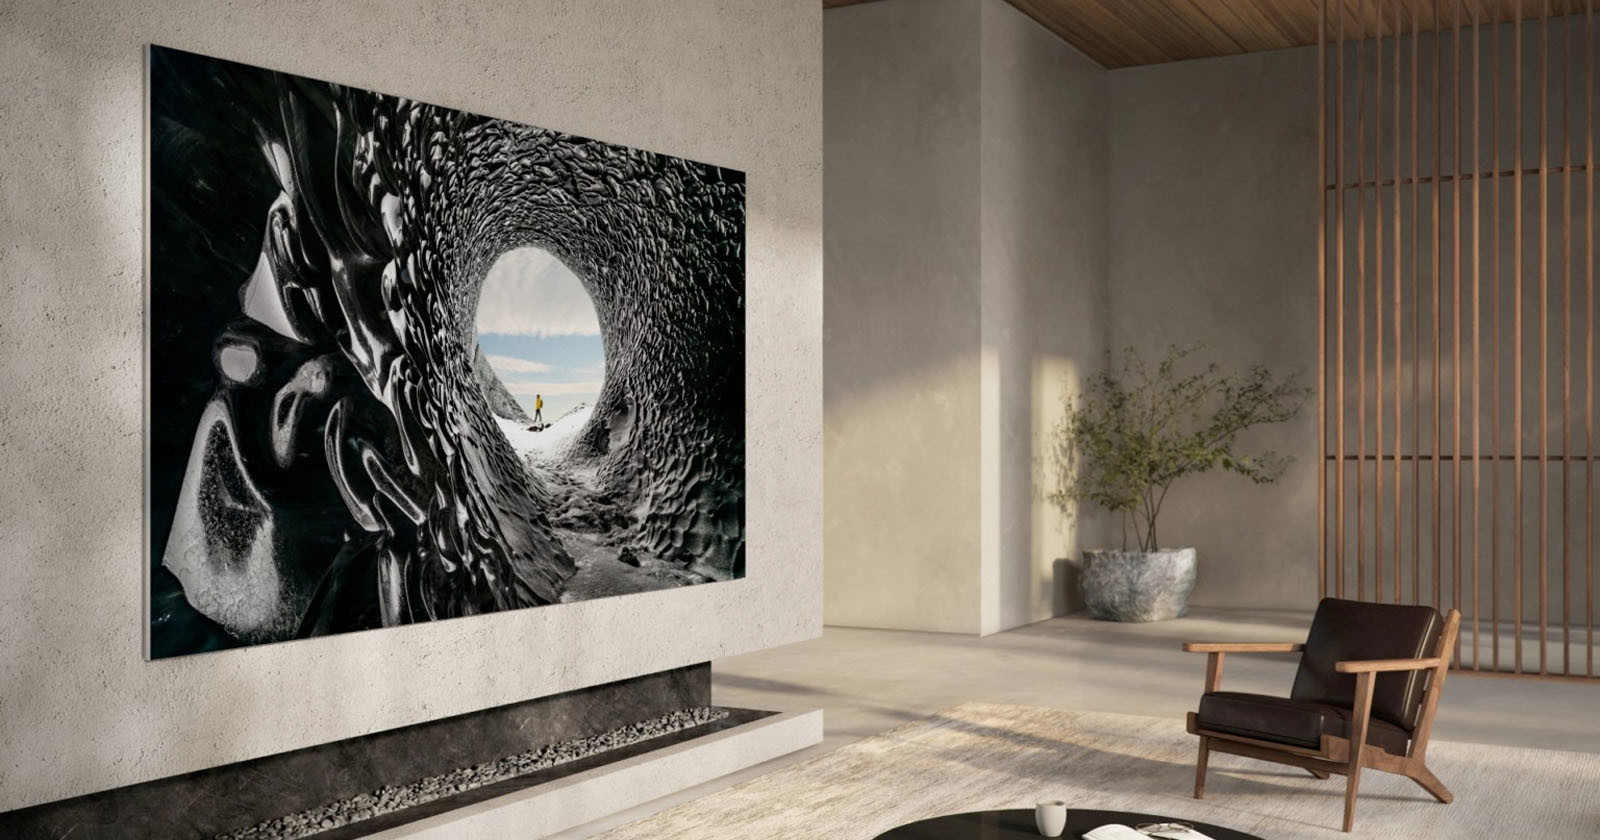 Samsung Explains How It Will Integrate Photo NFTs into its 2022 TVs